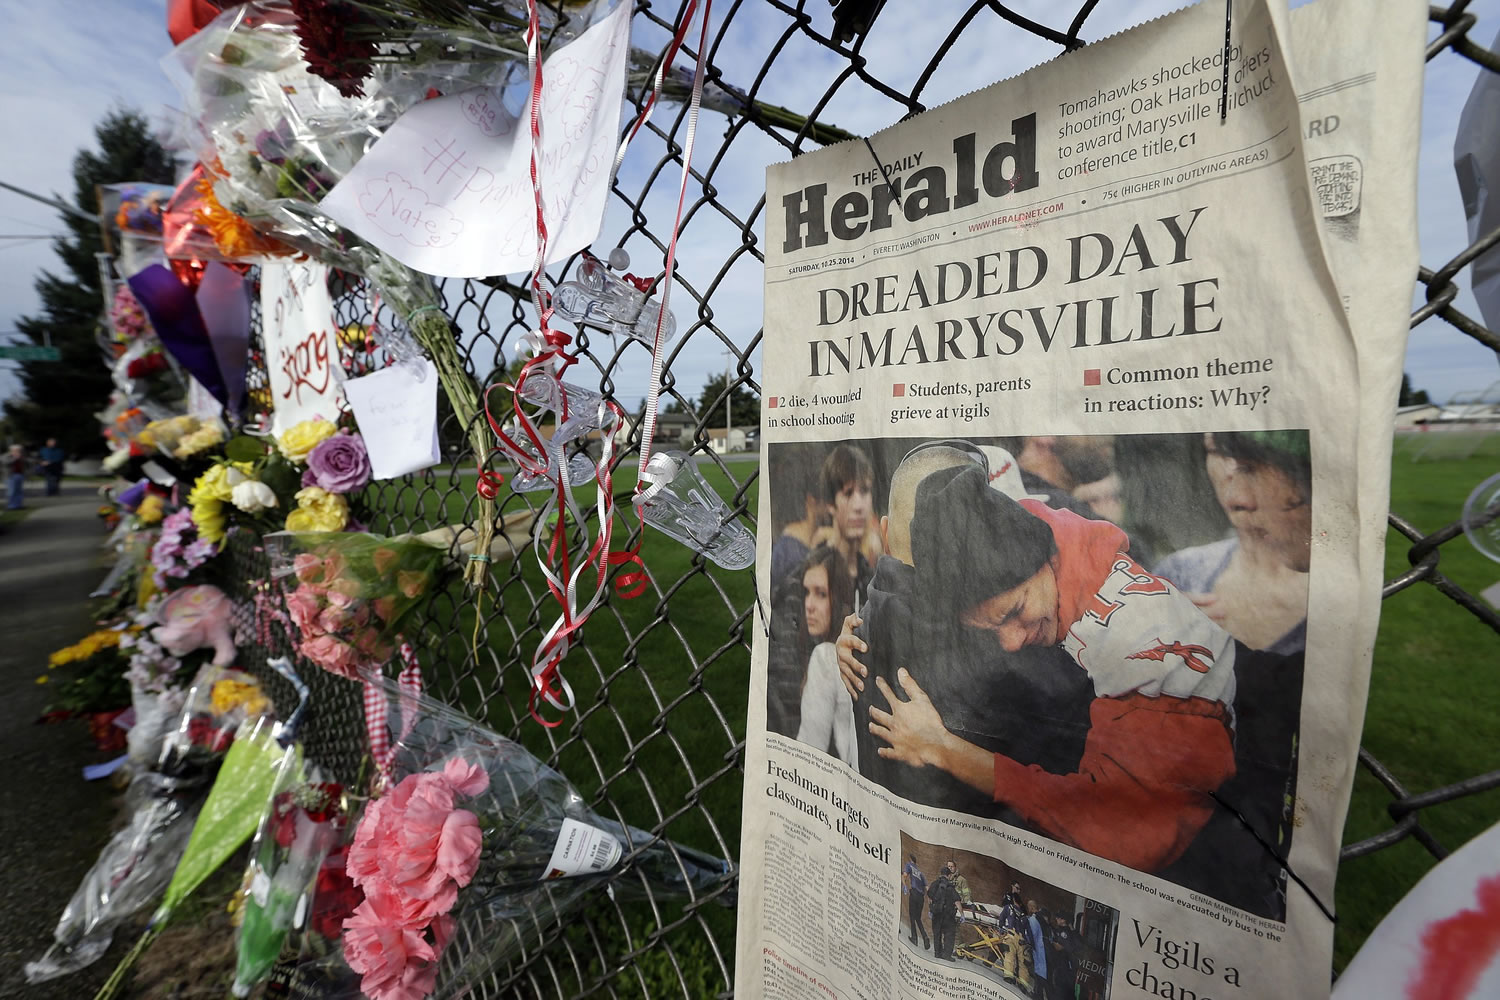 An edition of The Daily Herald from Everett with the headline &quot;Dreaded Day in Marysville&quot; is shown as part of a growing memorial on a fence around Marysville Pilchuck High School in Marysville.